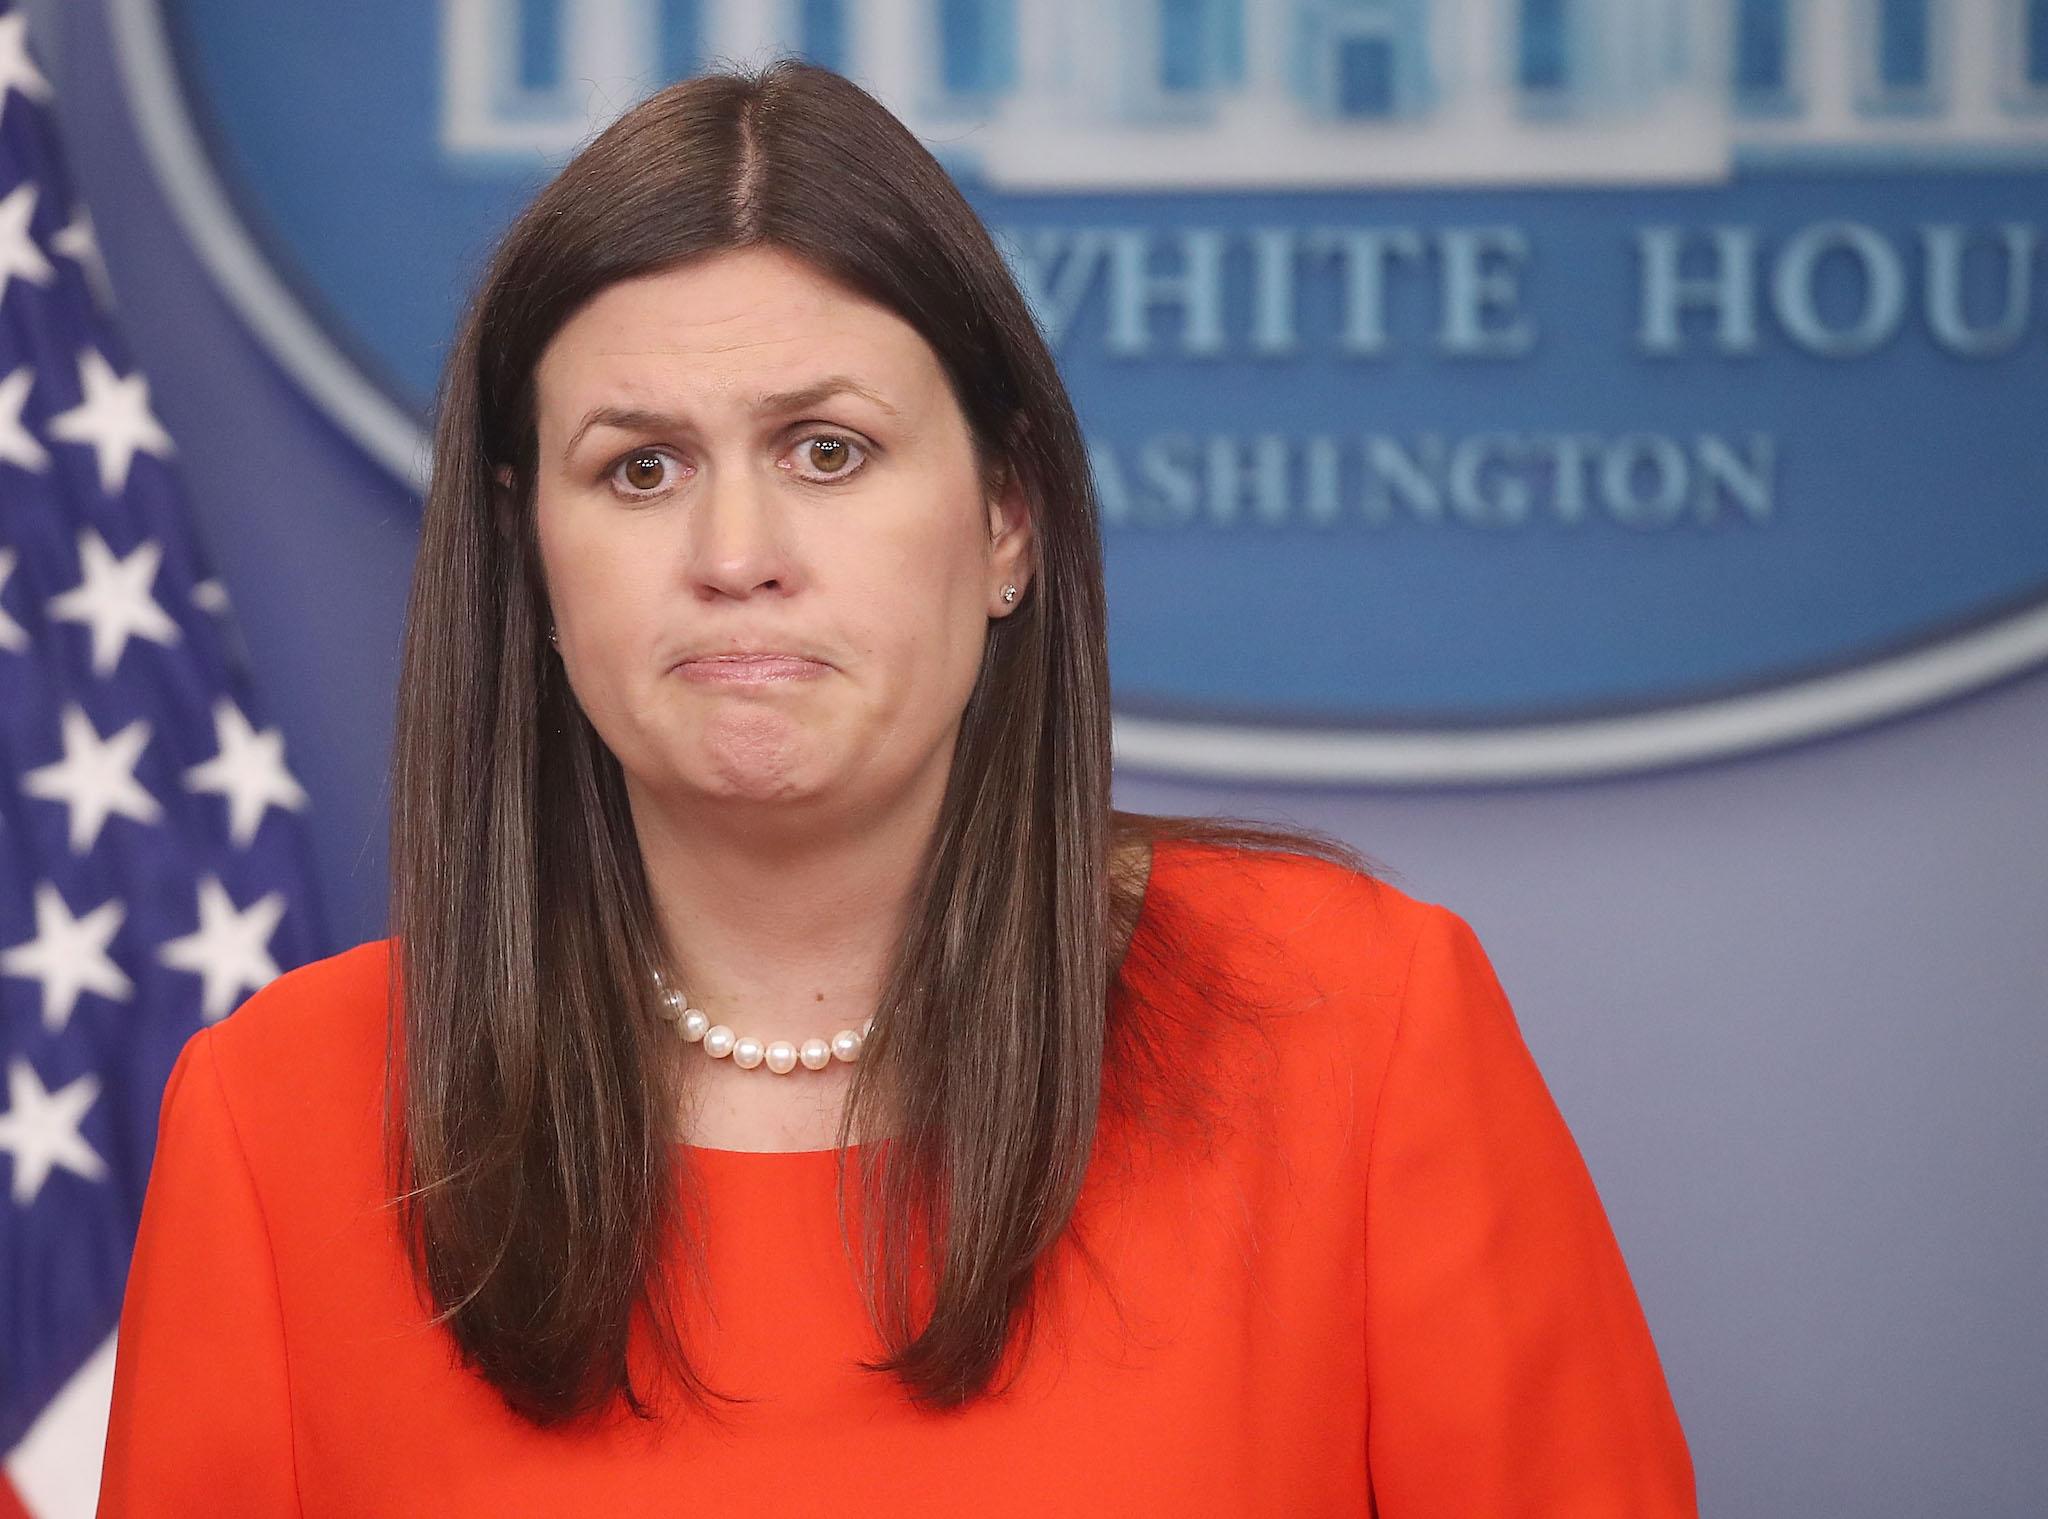 Sarah Huckabee Sanders' comment is under scrutiny by ethics experts